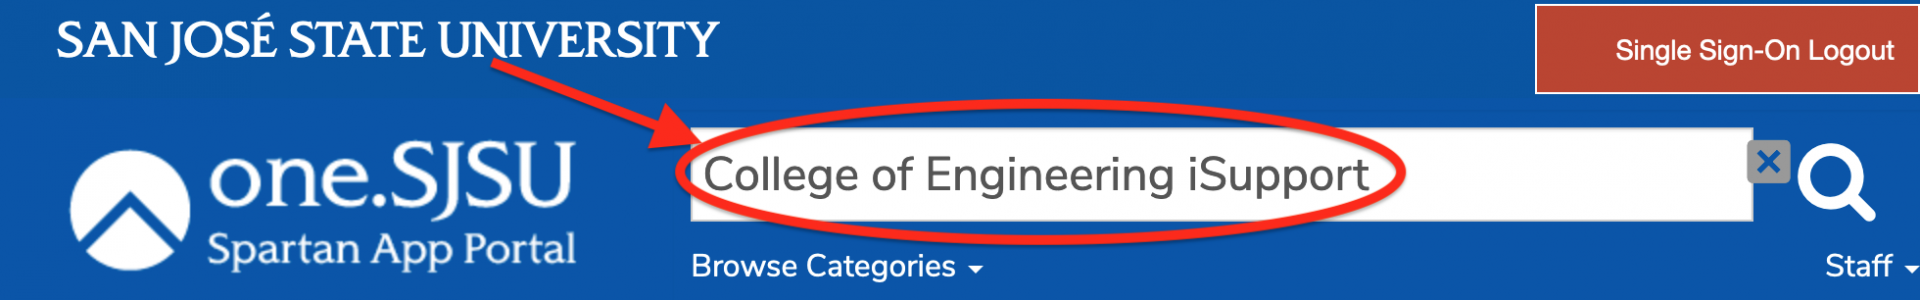 enter College of Engineering iSupport in the search box.